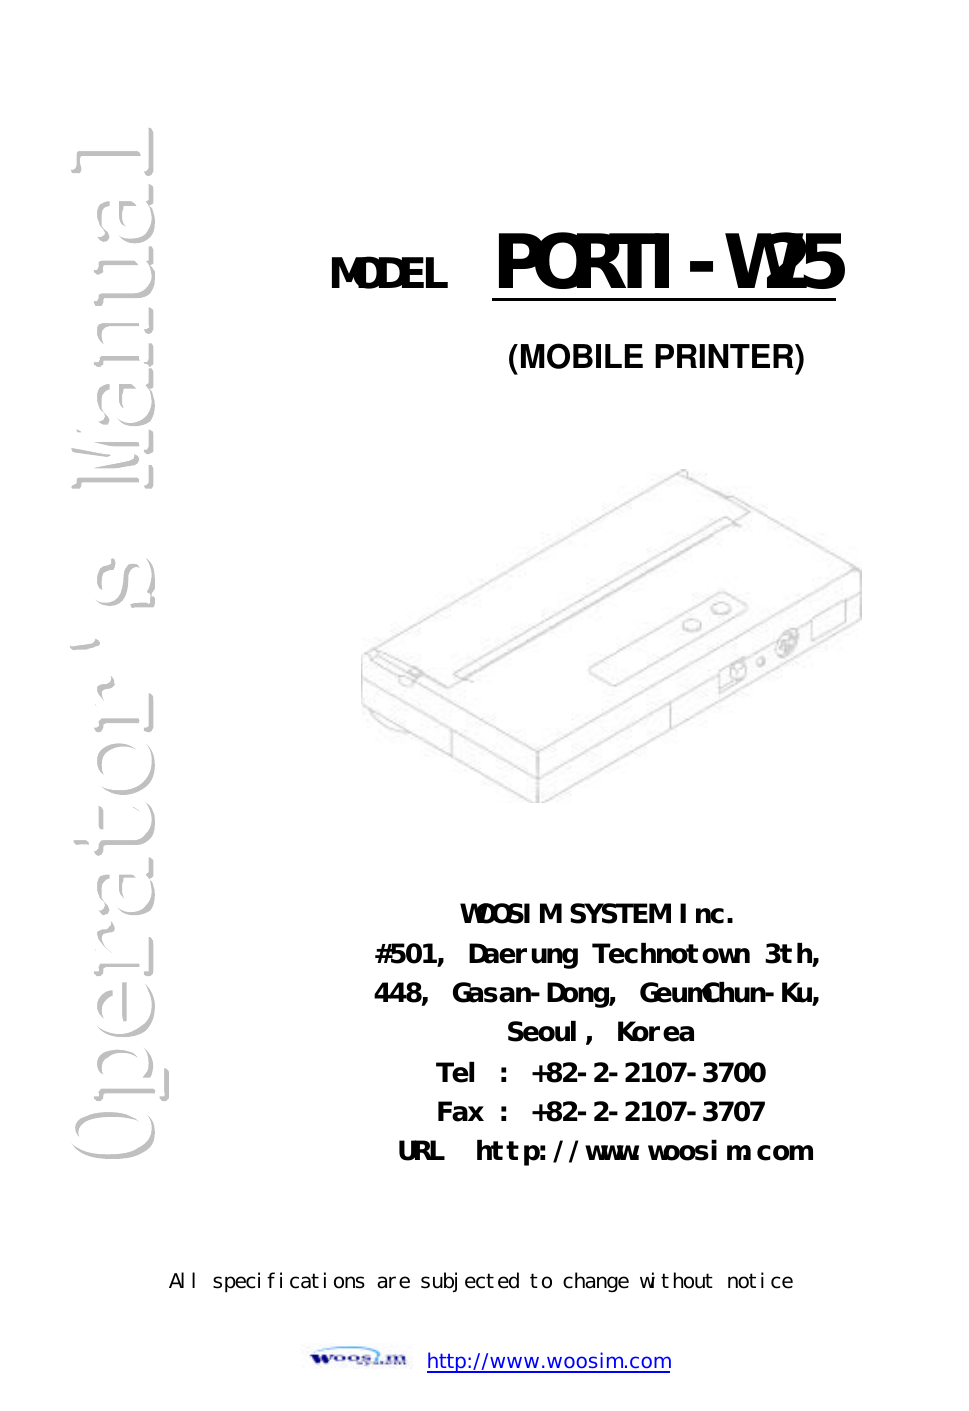  http://www.woosim.com                                                       MODEL  PORTI-W25WOOSIM SYSTEM Inc. #501, Daerung Technotown 3th, 448, Gasan-Dong, GeumChun-Ku,  Seoul, Korea Tel : +82-2-2107-3700 Fax : +82-2-2107-3707 URL  http://www.woosim.com (MOBILE PRINTER) All specifications are subjected to change without notice 